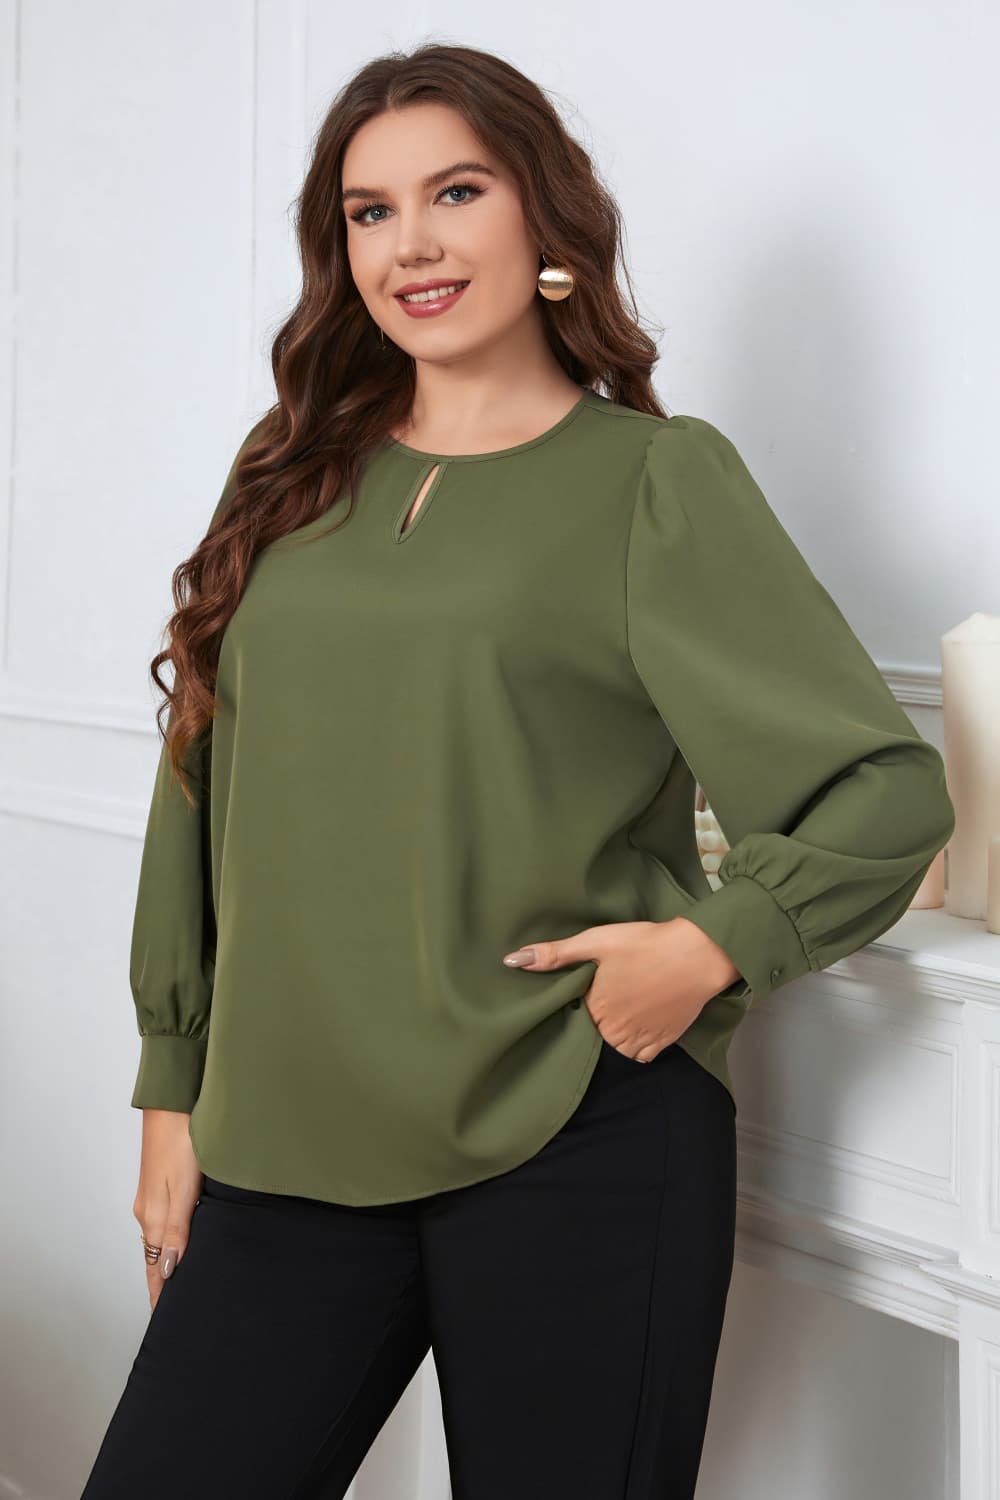 Melo Apparel Plus Size Round Neck Long Sleeve Blouse